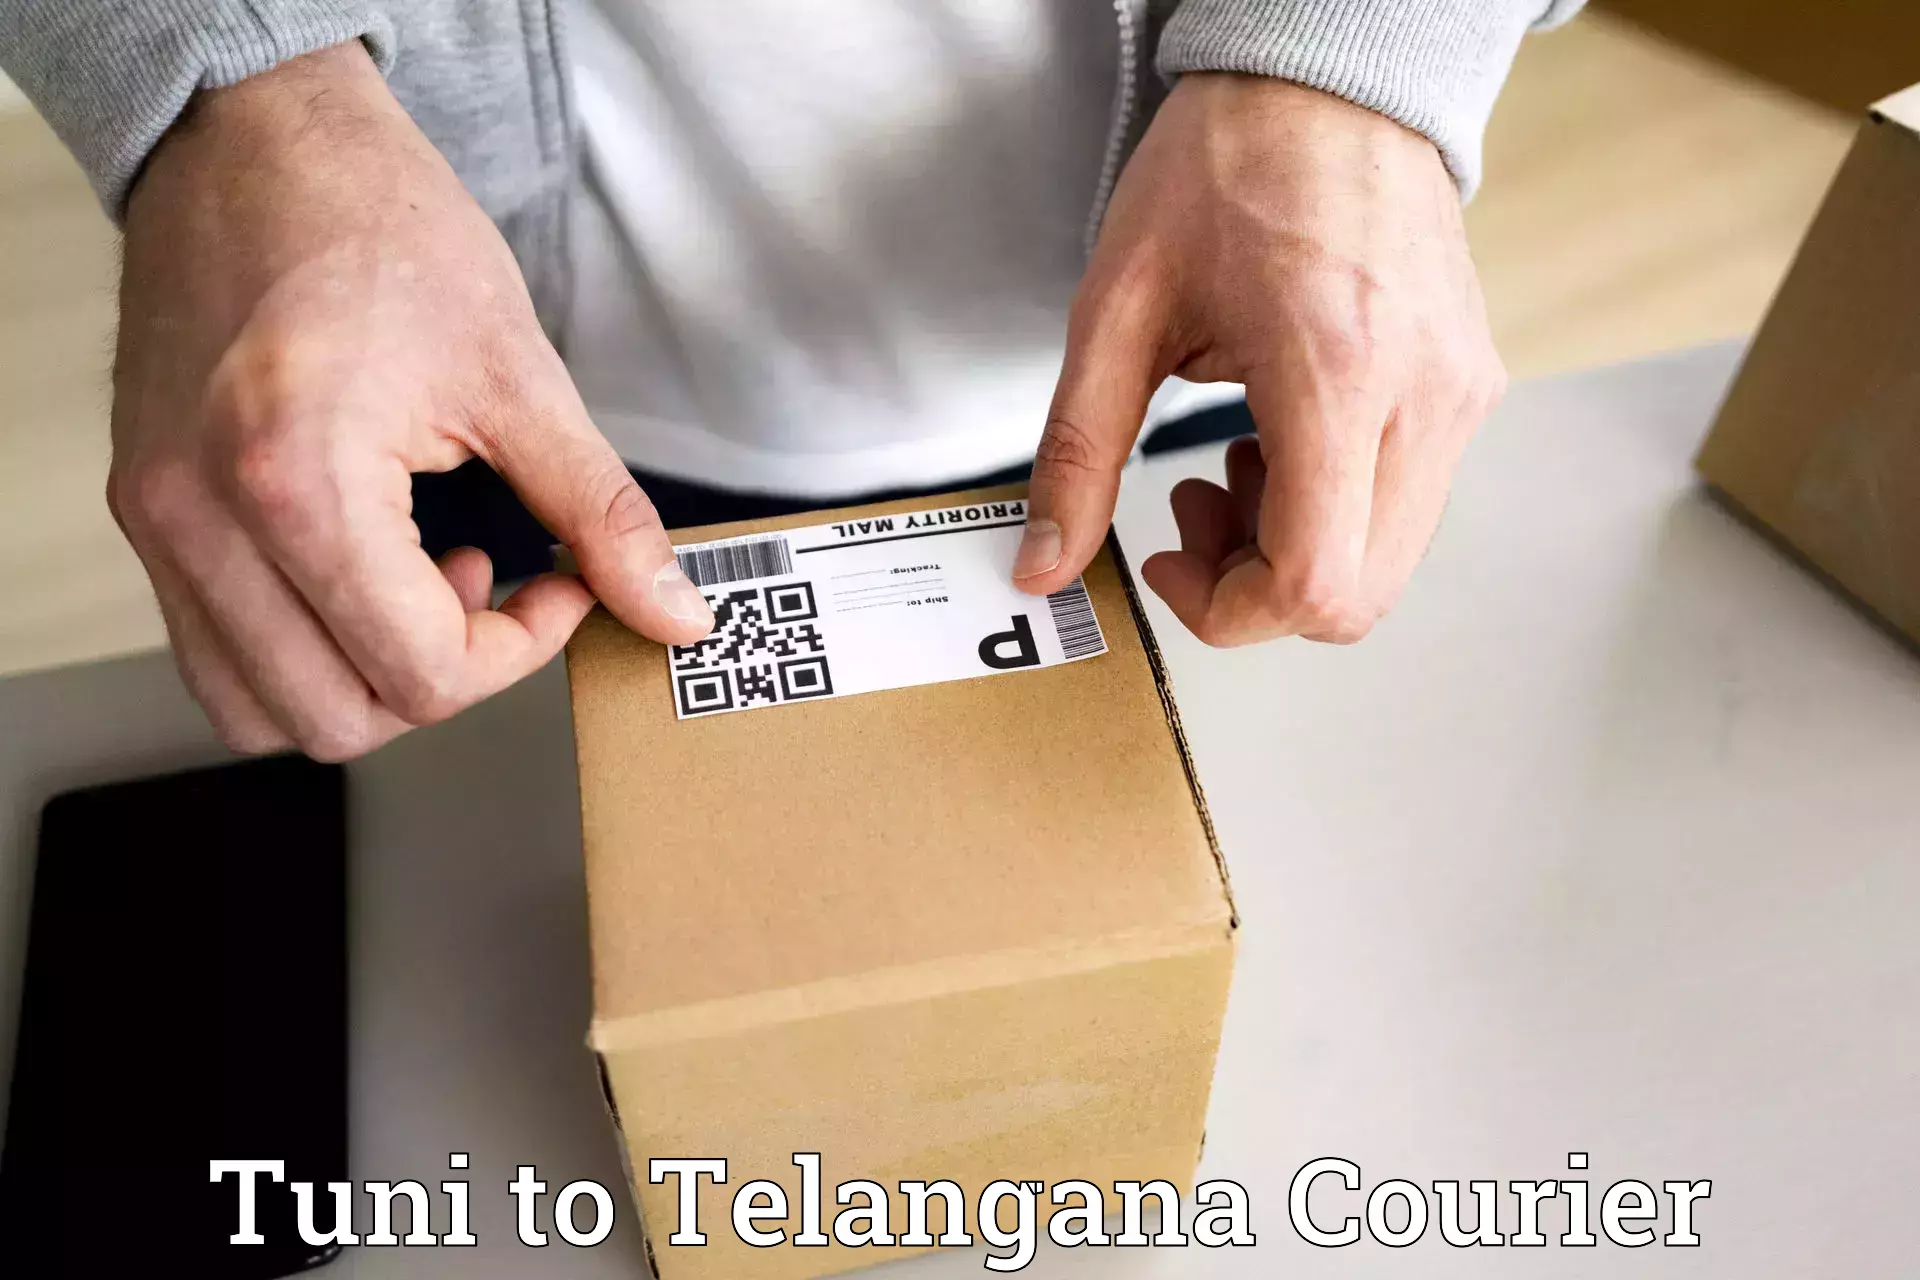 Affordable parcel service Tuni to Telangana